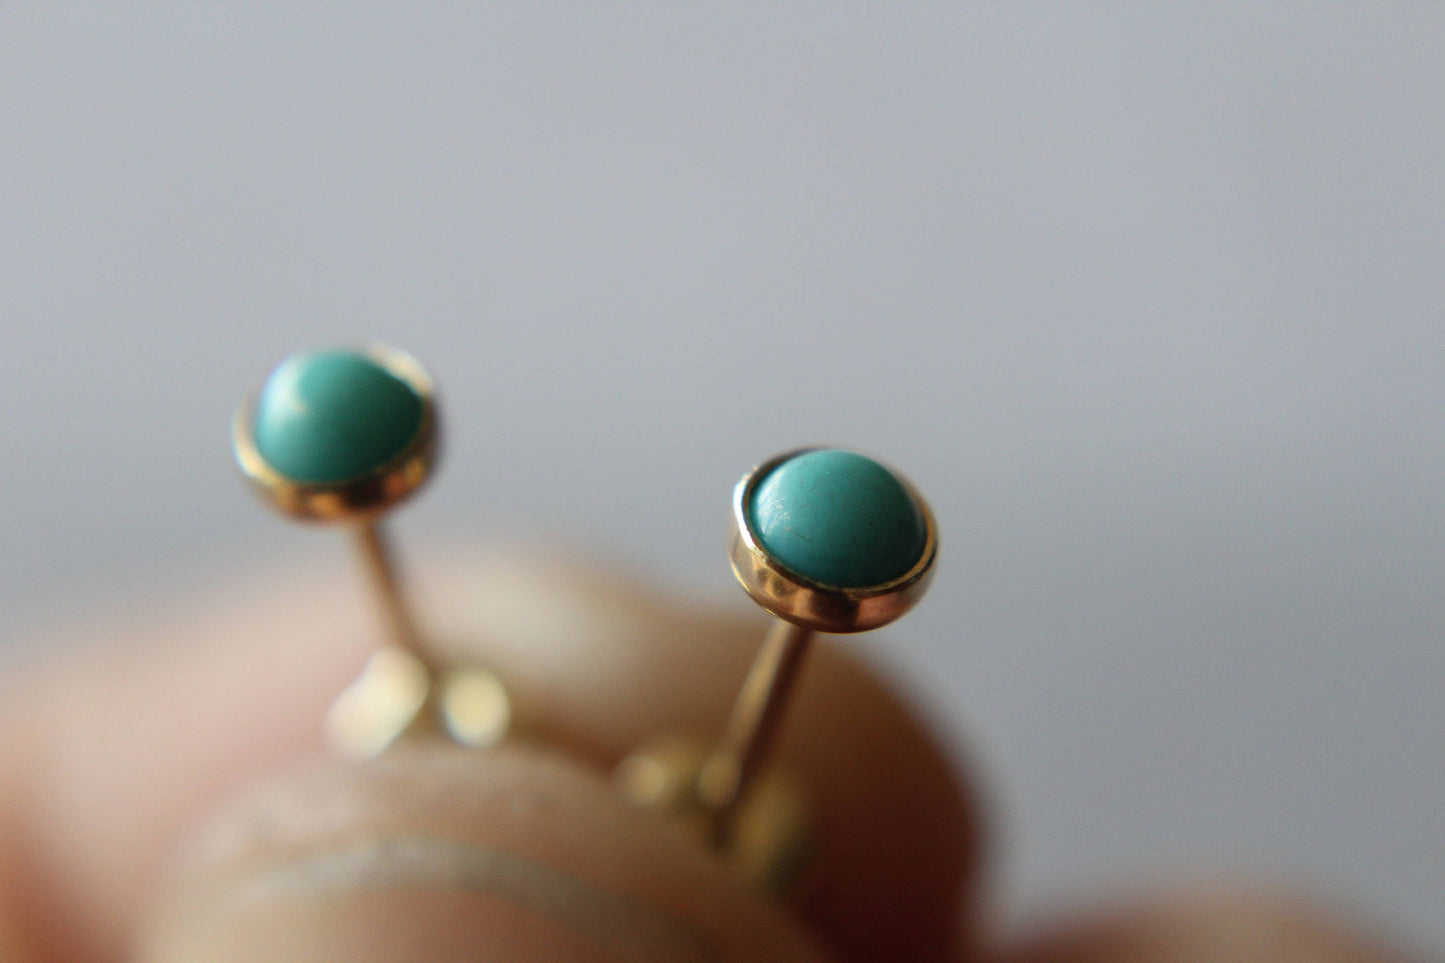 Turquoise Earrings, Solid Gold Studs, 14kt Gold Stud Earrings, Turquoise Studs, Gold Earrings, Earrings, Gold Studs, Gemstone Earrings, Gift